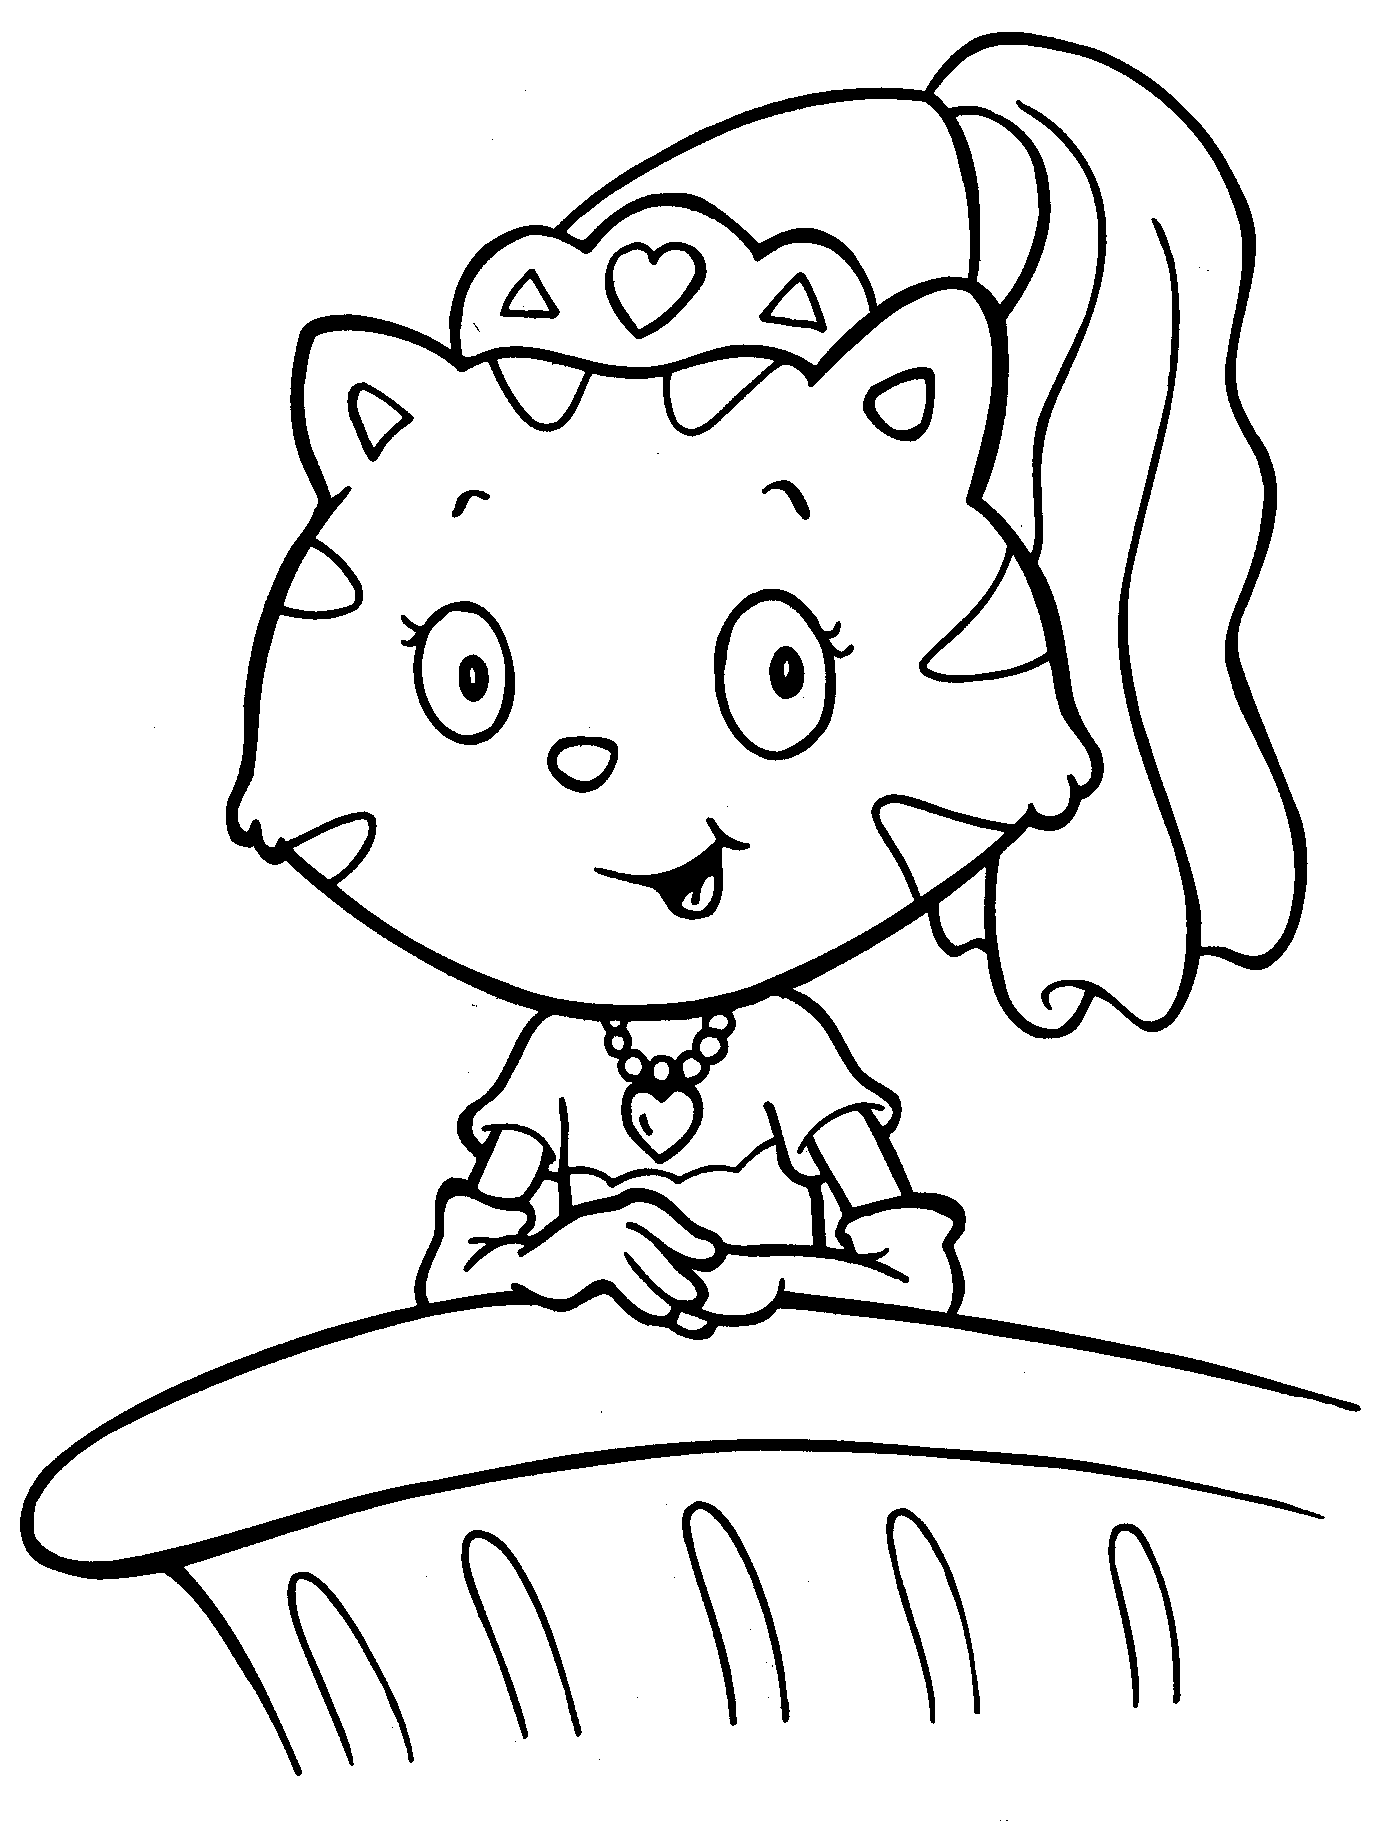 cute kitten pictures to print kitten and puppy coloring pages to print coloring home kitten pictures cute to print 